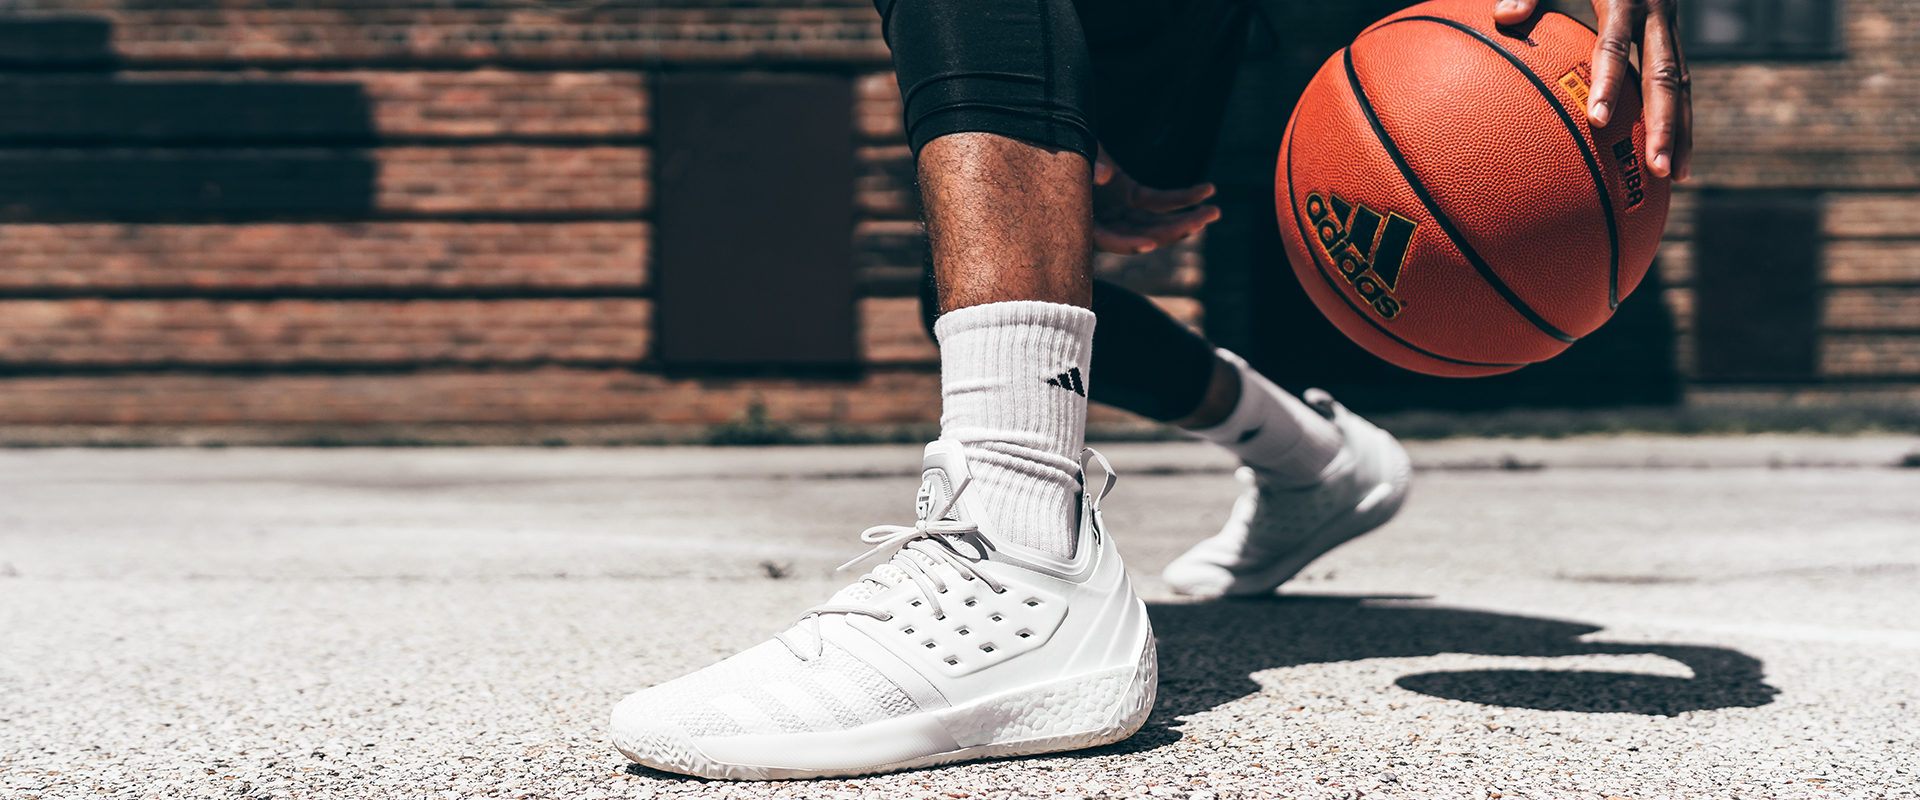 Basketball Shoes Market Research Report - Industry Competitor Analysis, Opportunity, Strategic Growth, Size, Share